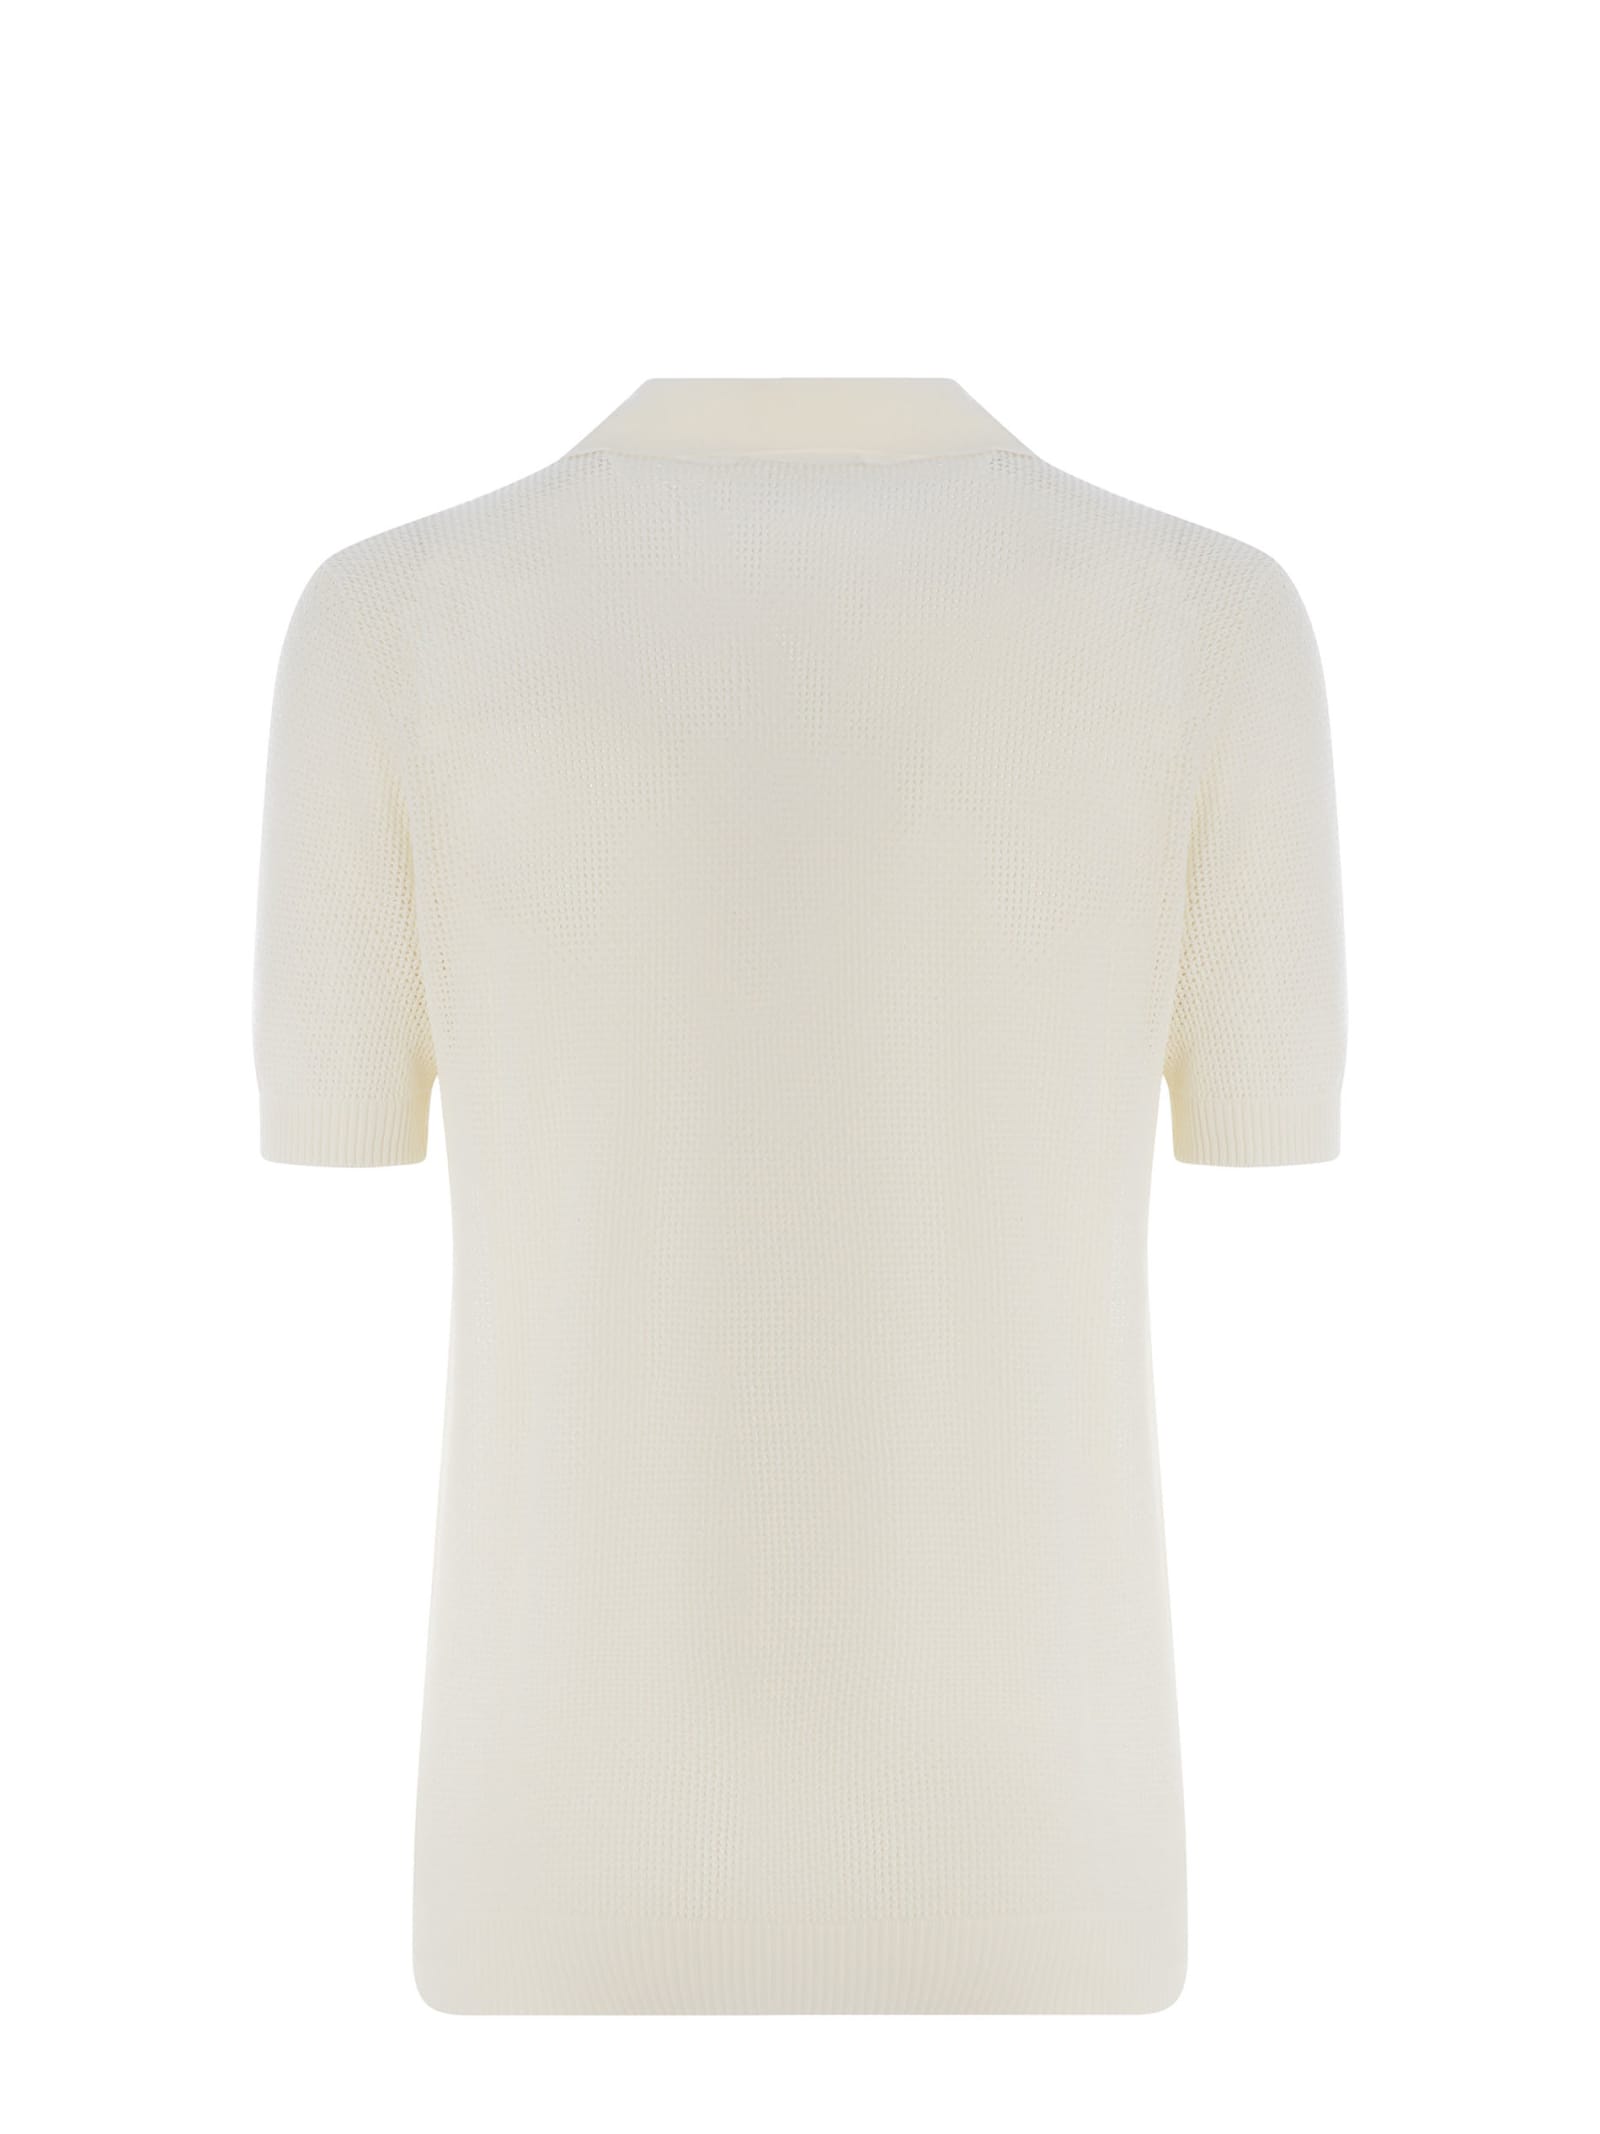 Shop Tagliatore Polo Shirt  Made Of Cotton Thread In Beige